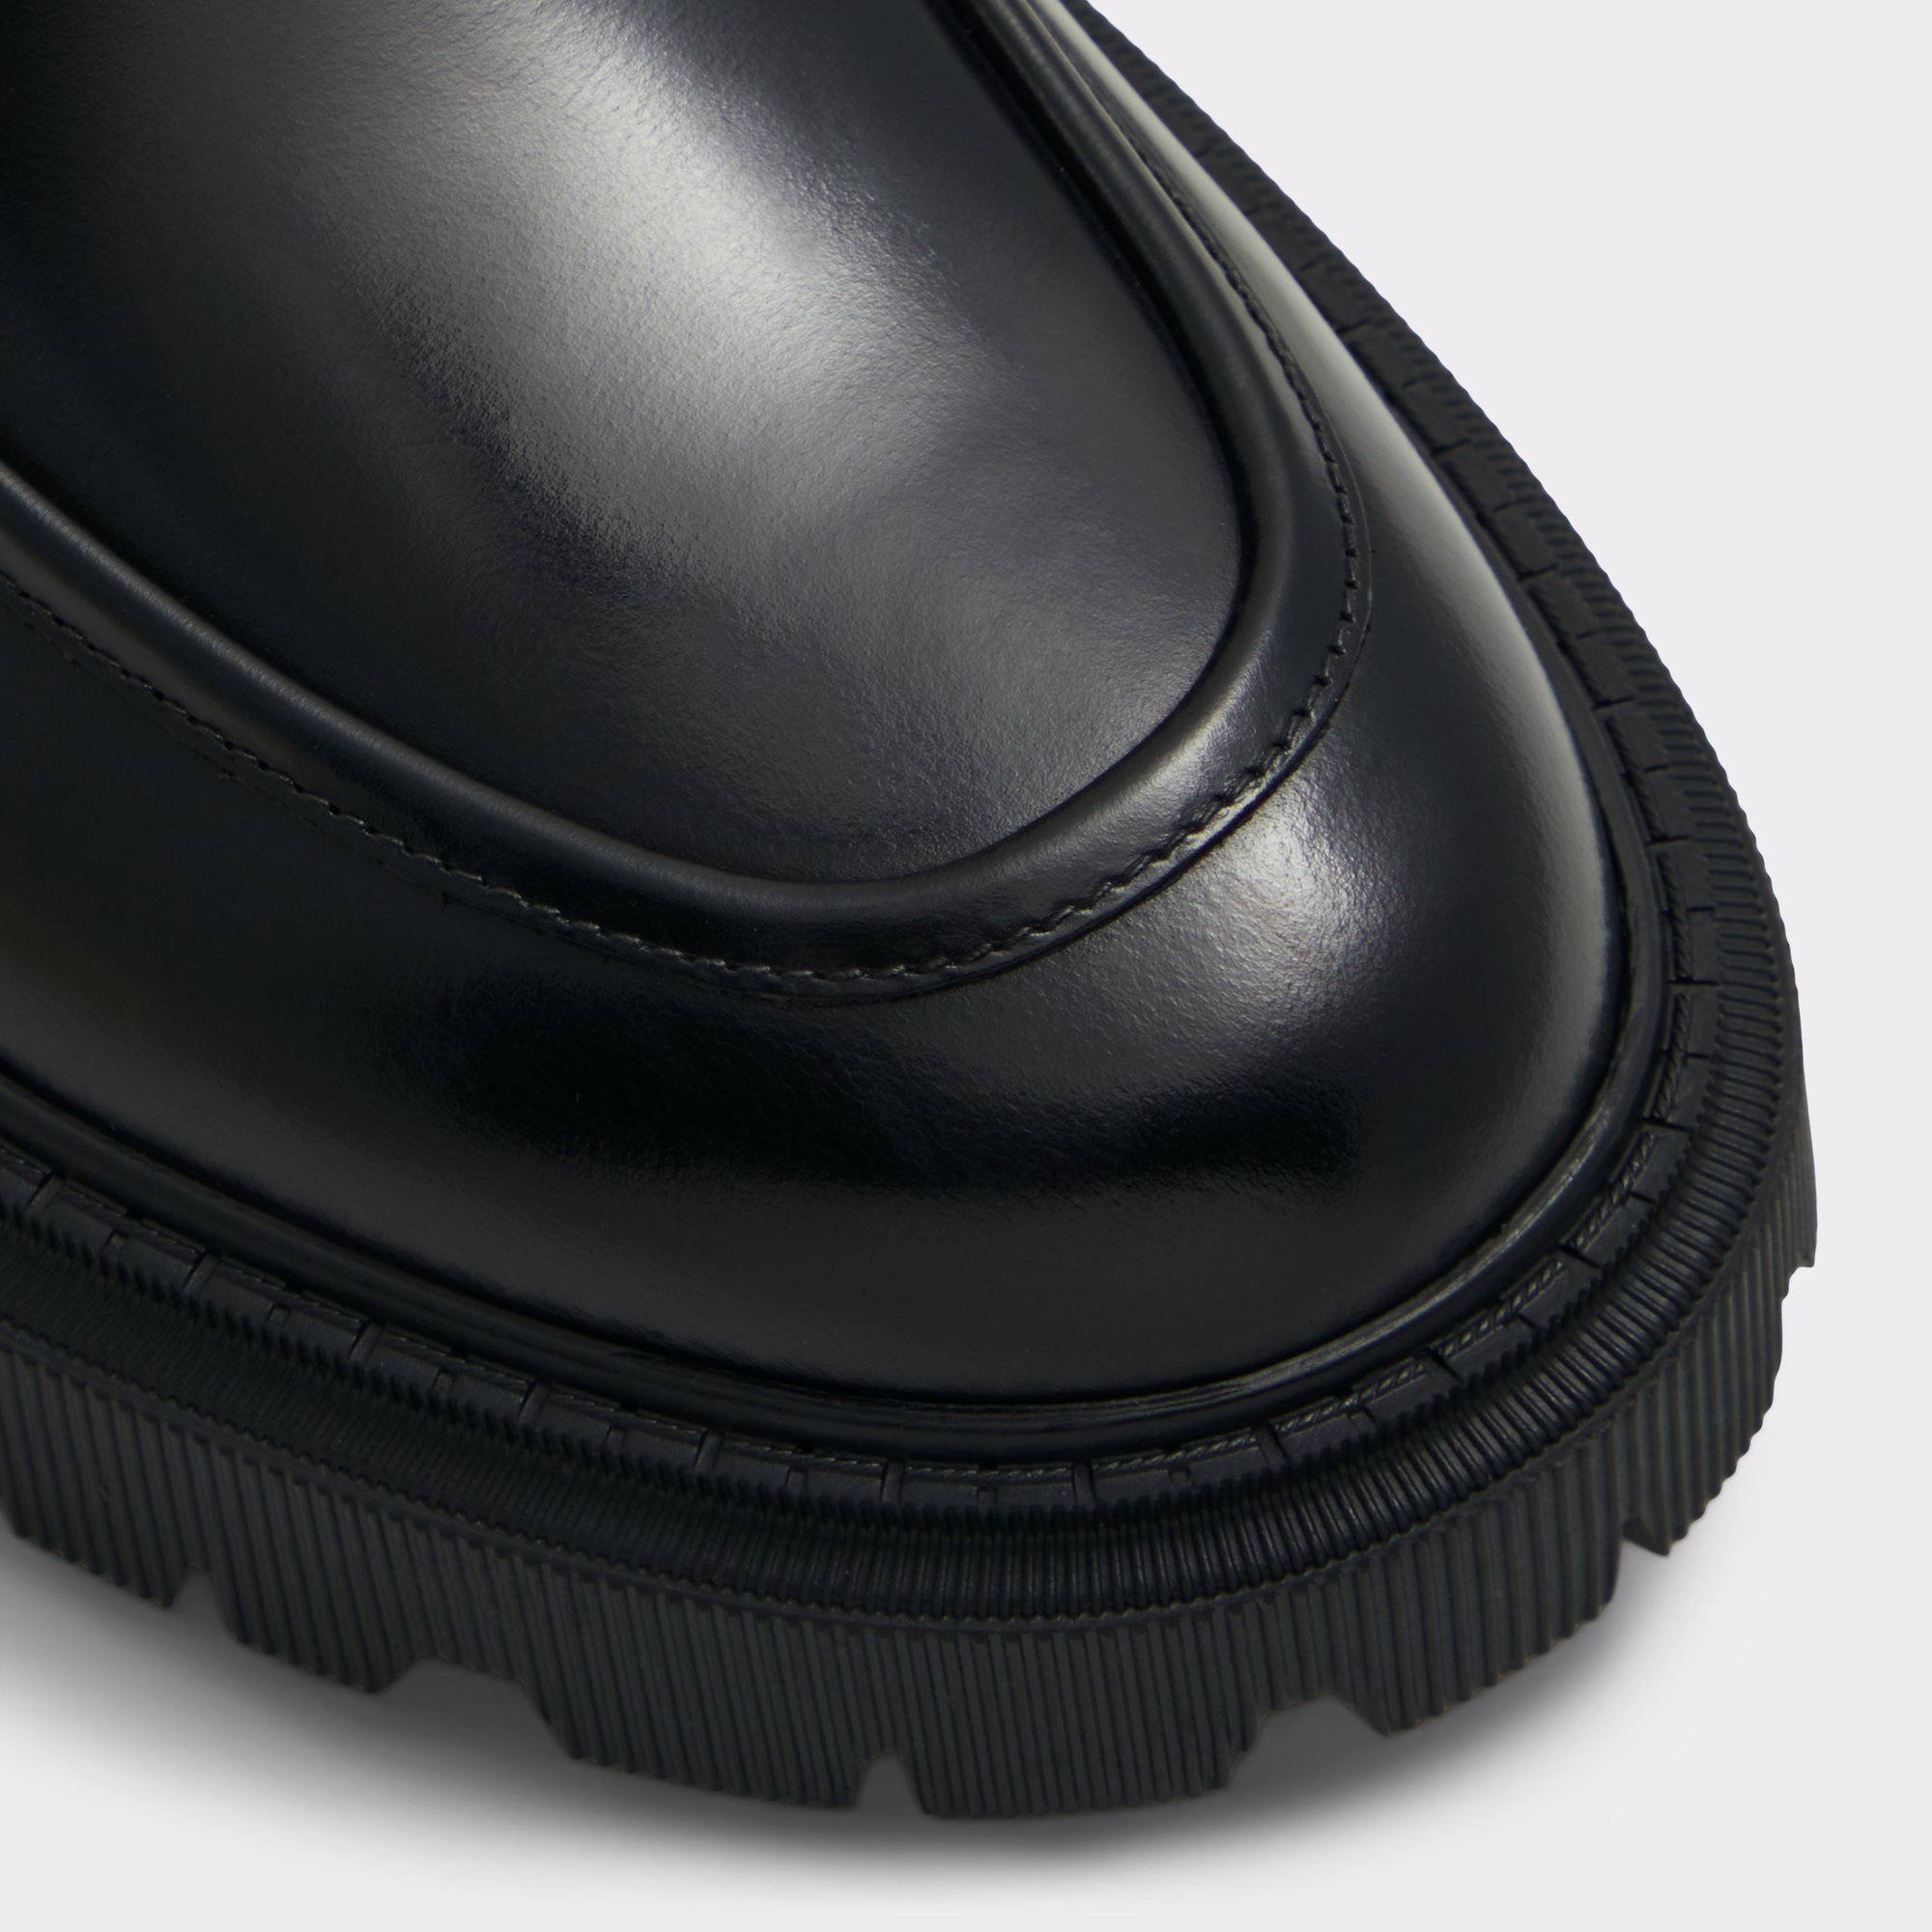 Exeter Black Leather Shiny Men's Loafers & Slip-Ons | ALDO Canada